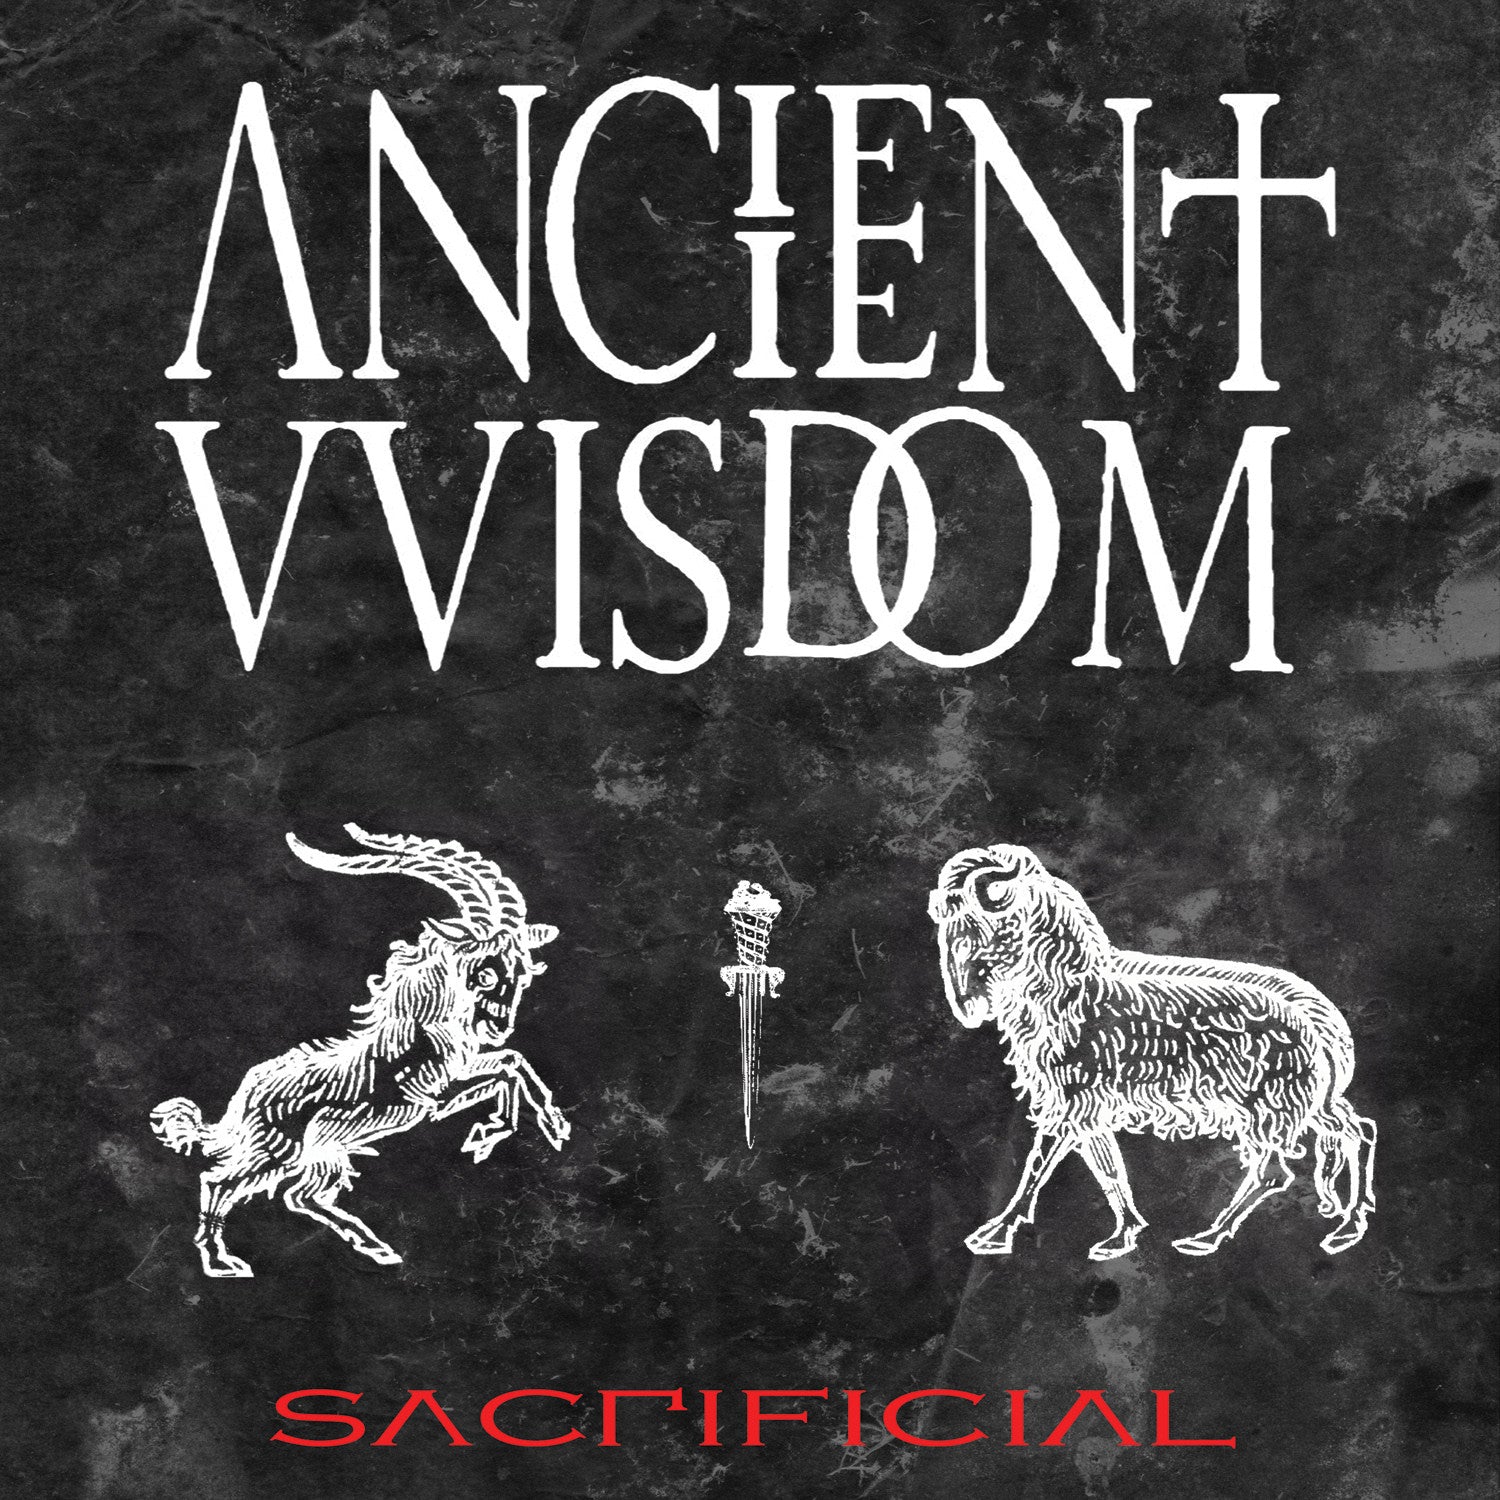 Ancient Wisdom - Sacrificial - New Vinyl Record 2014 Magic Bullet Records Limited Edition Red Vinyl - Occult Rock / Neo-Folk (feat. members of Integrity!)